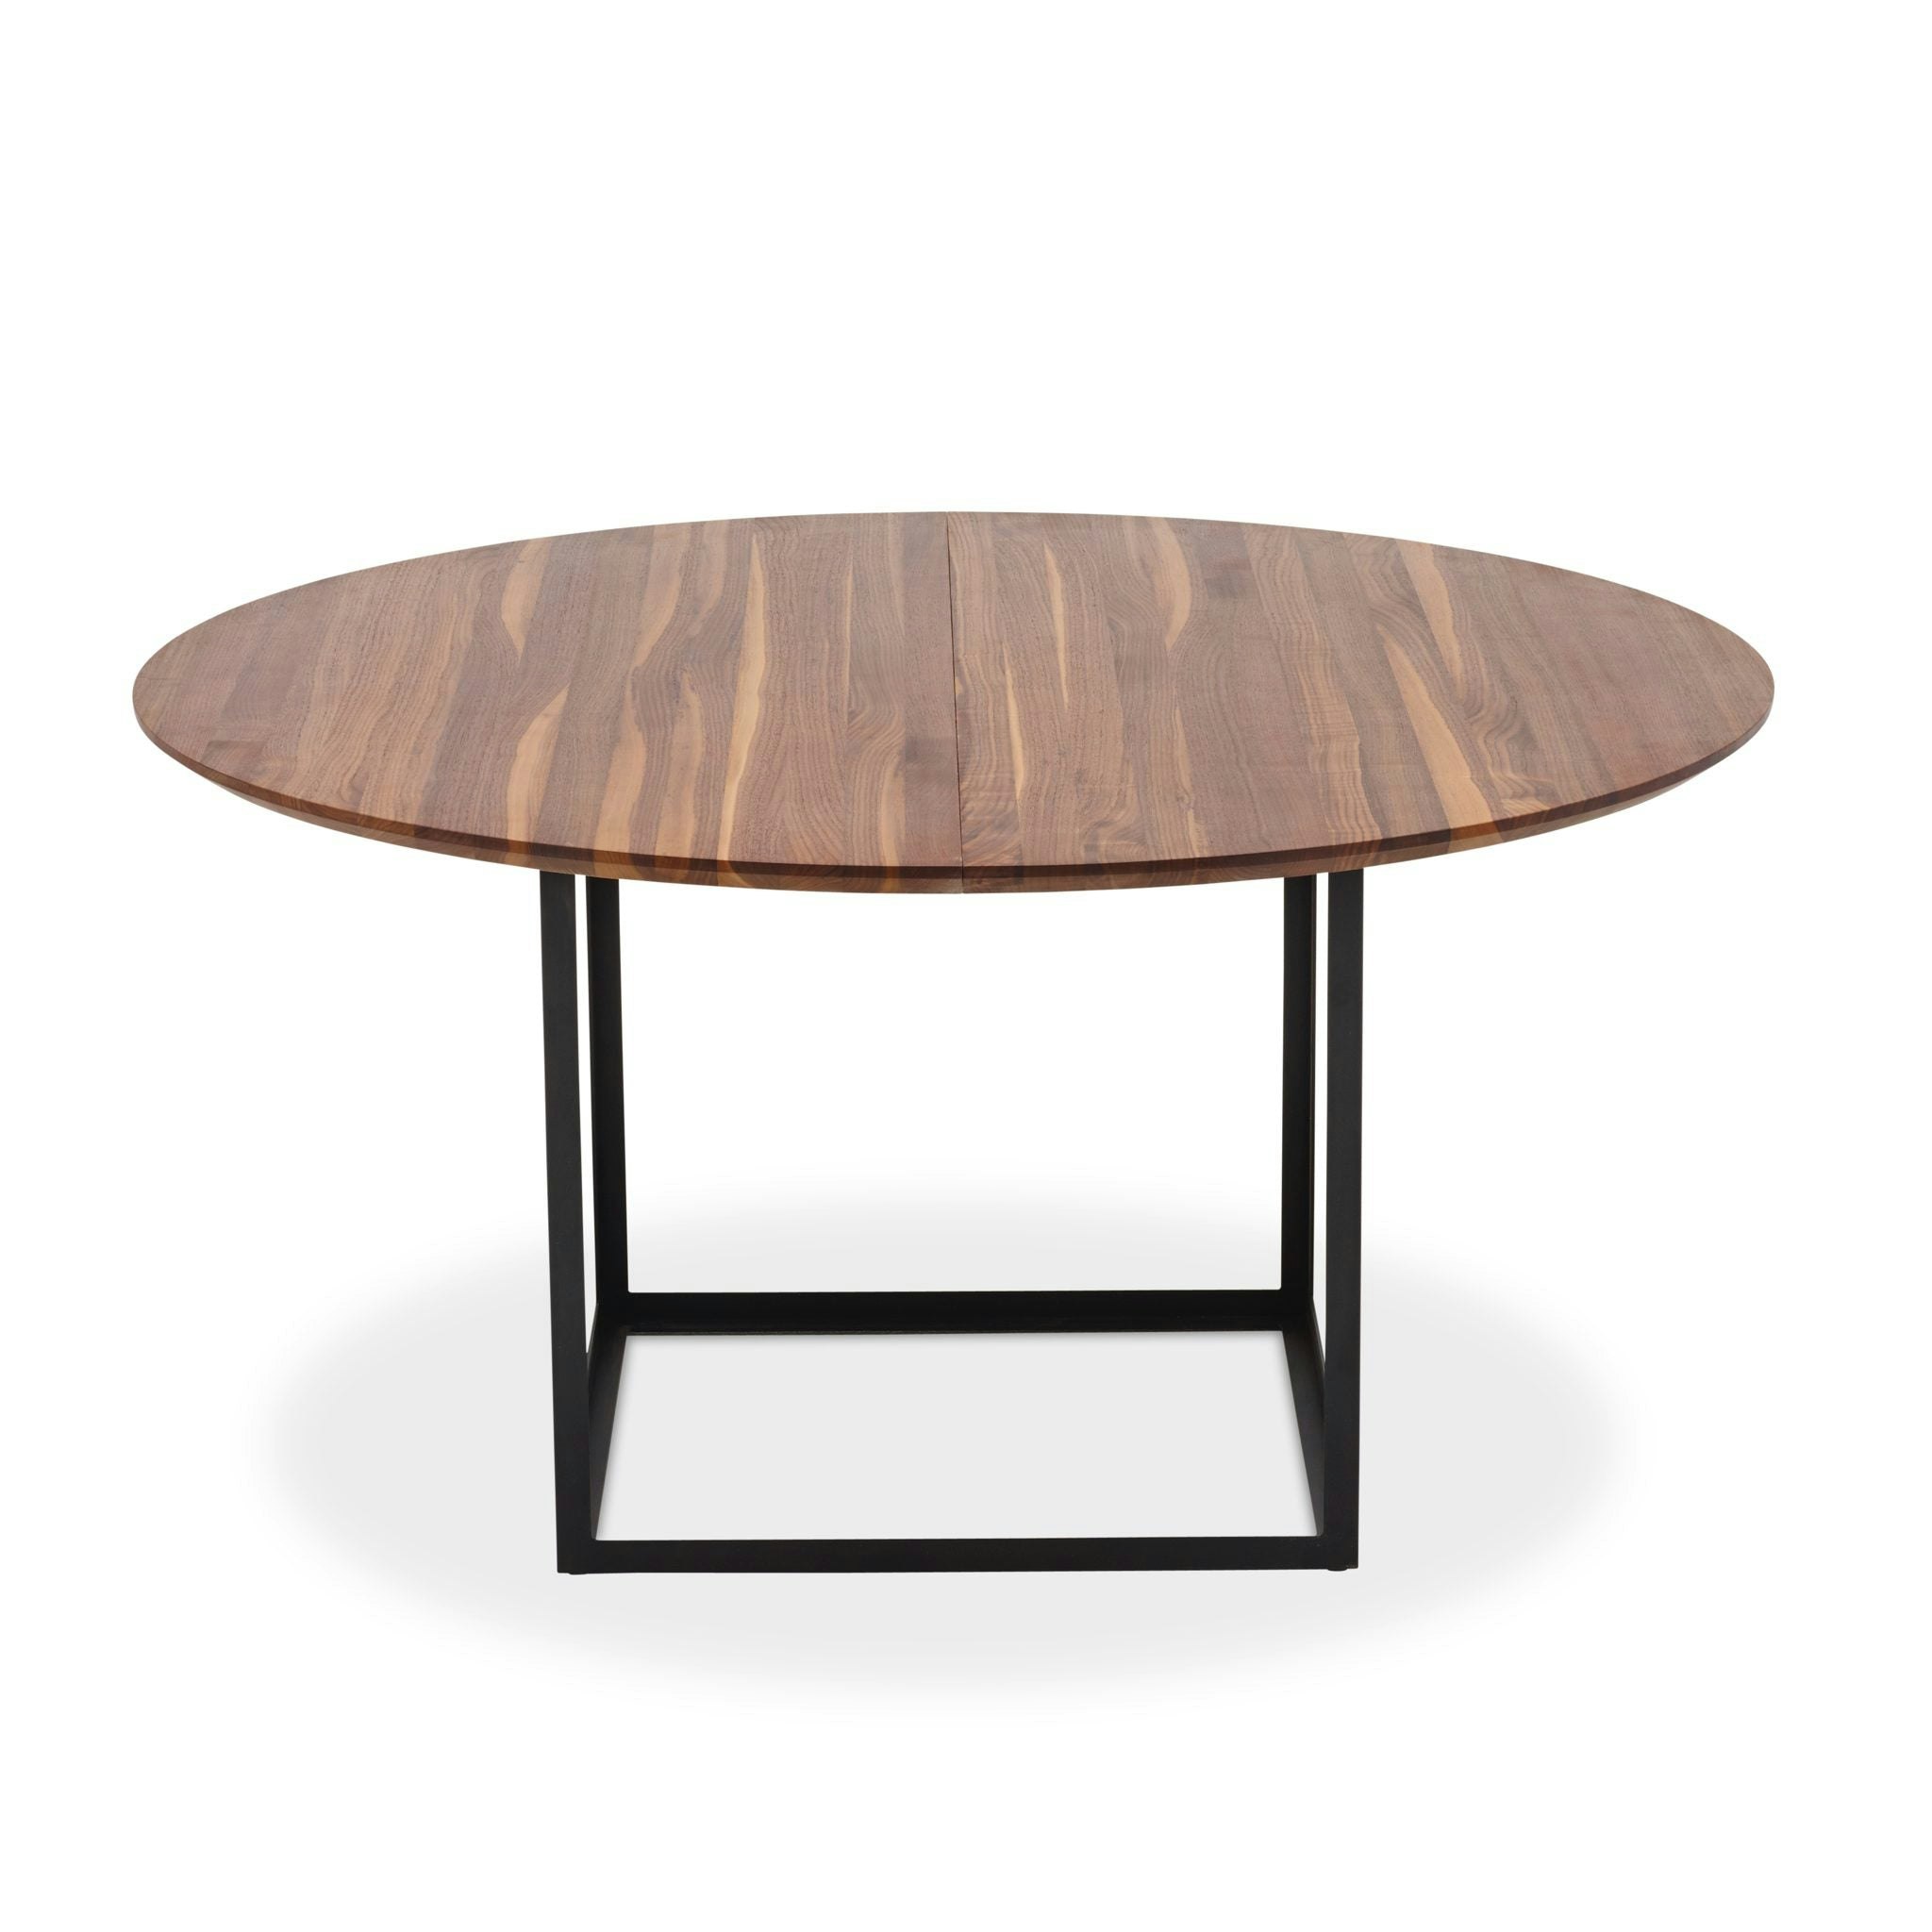 Jewel Table Round by Søren Juul for DK3